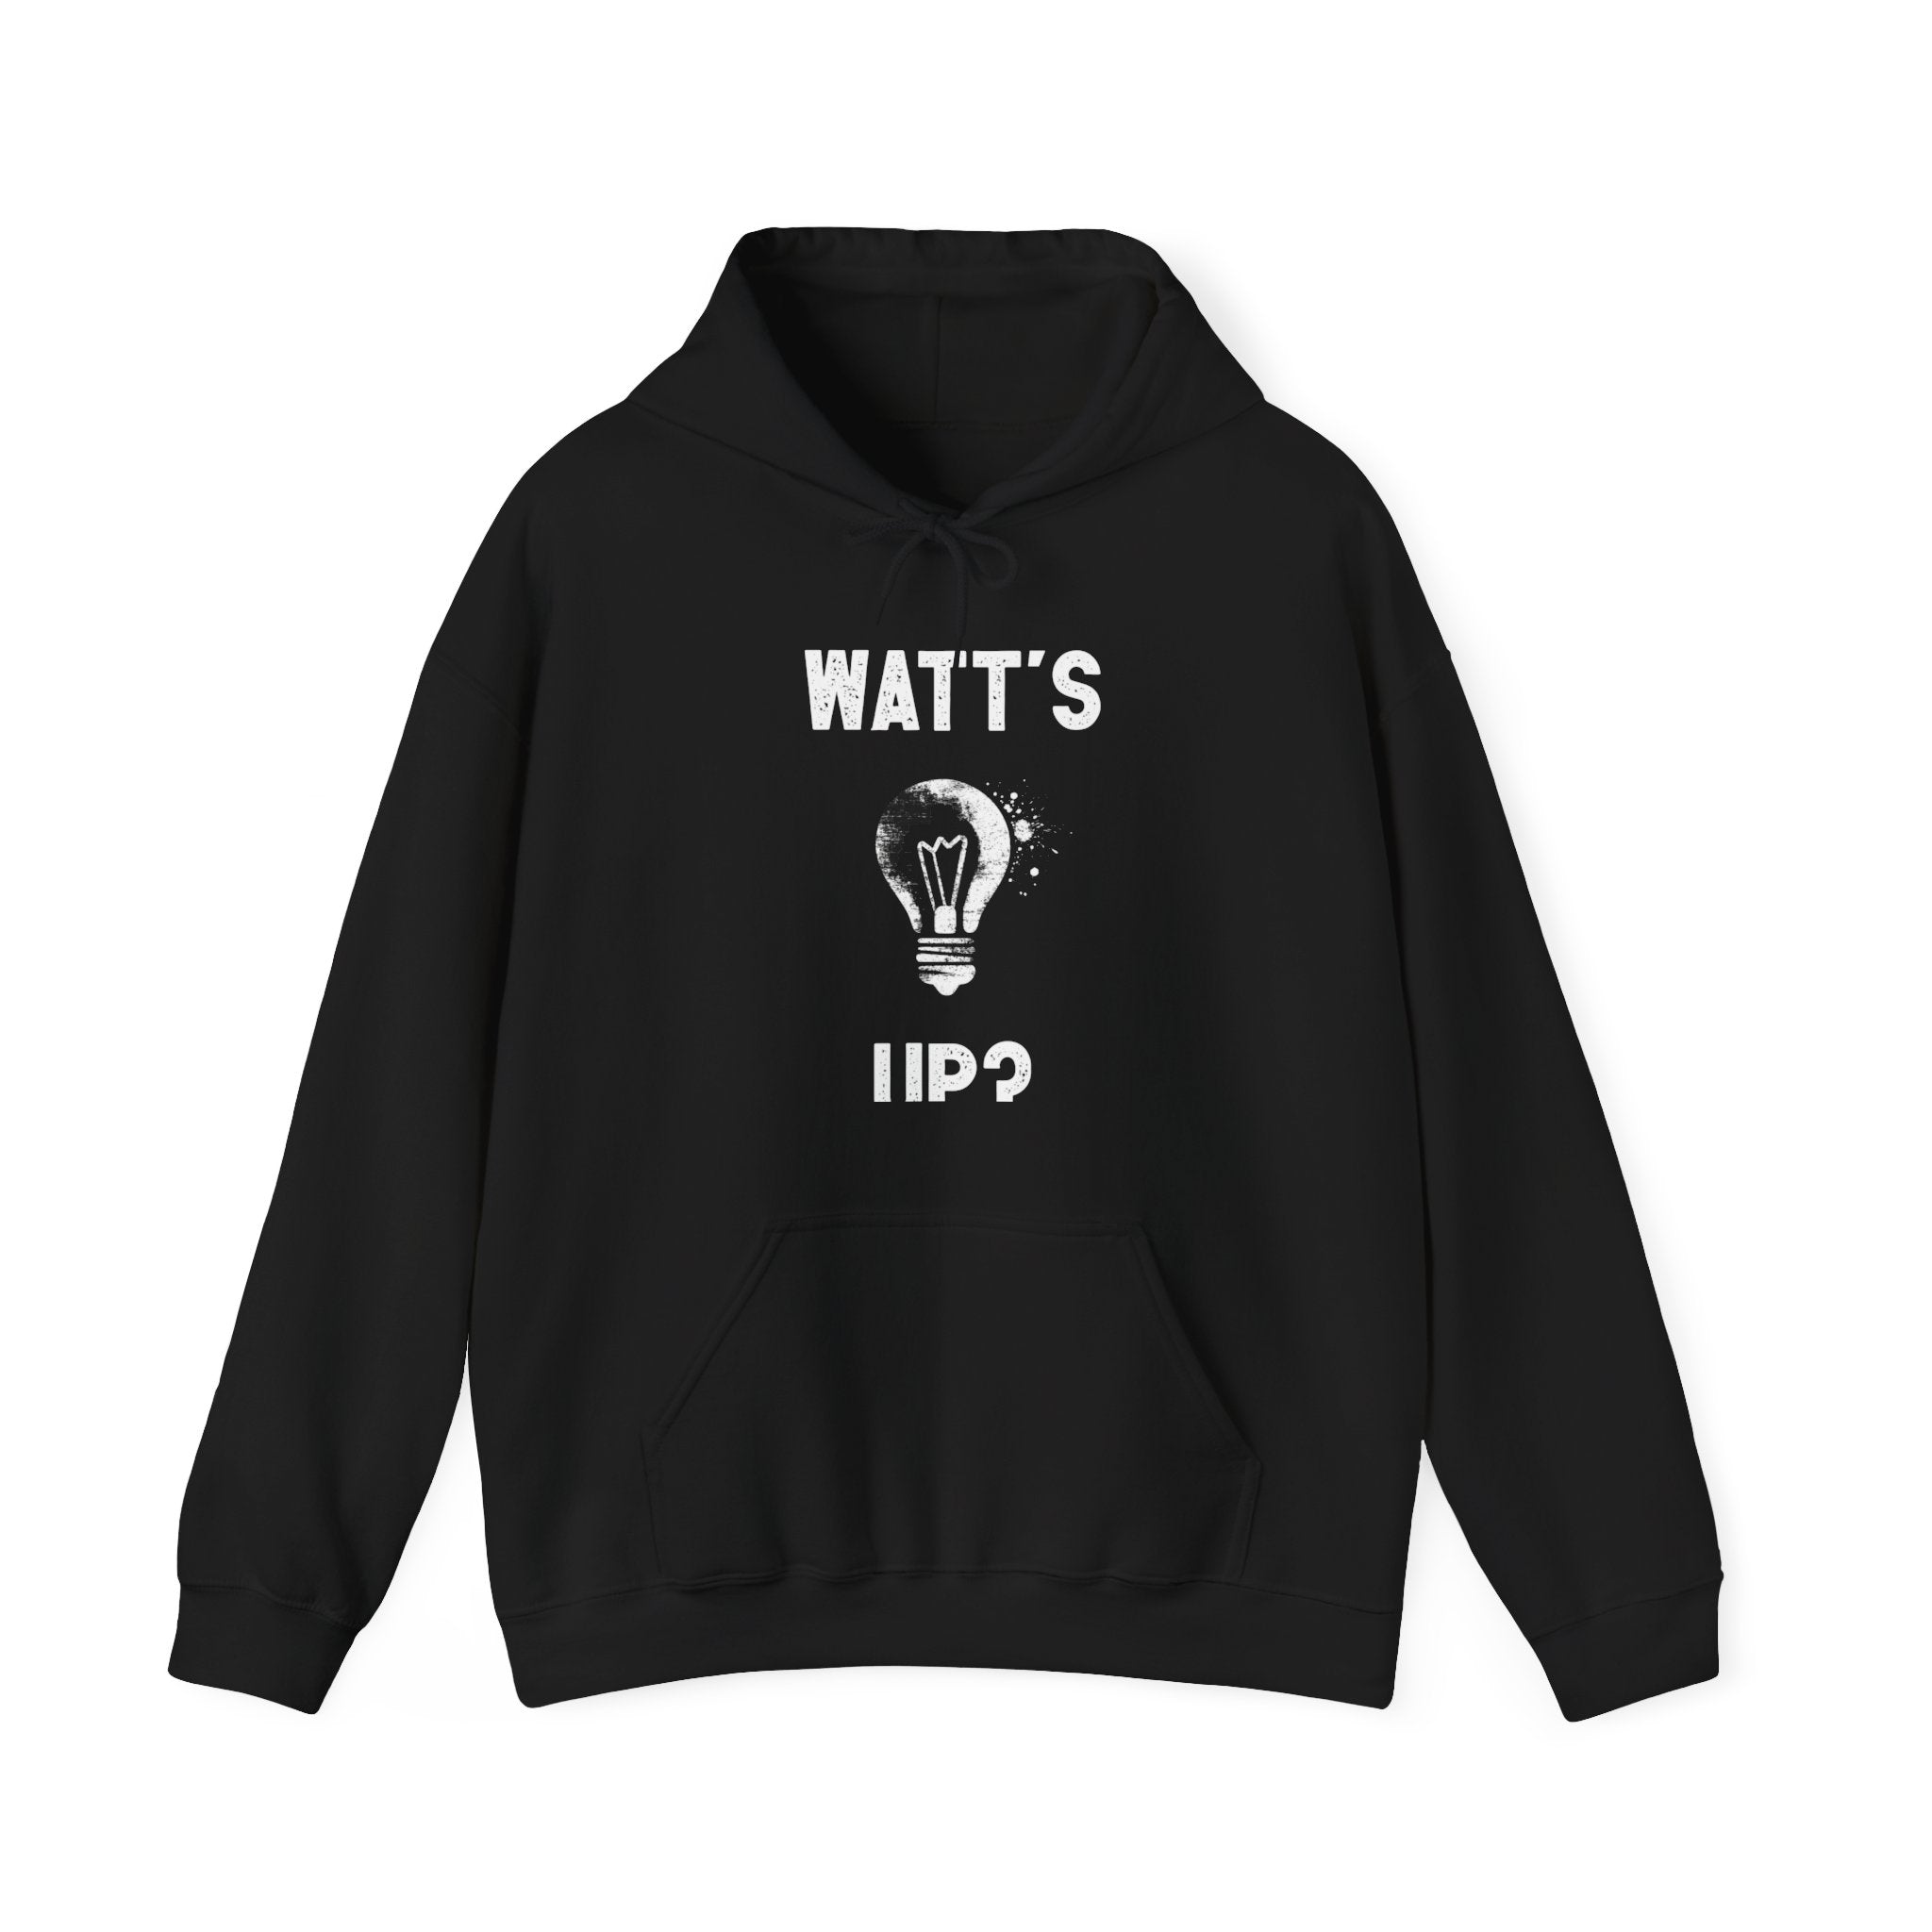 Watts Up - Hooded Sweatshirt with front pocket featuring the text "Watt's Up?" and an illustration of a light bulb. Perfect for fashion lovers who want to make a statement!